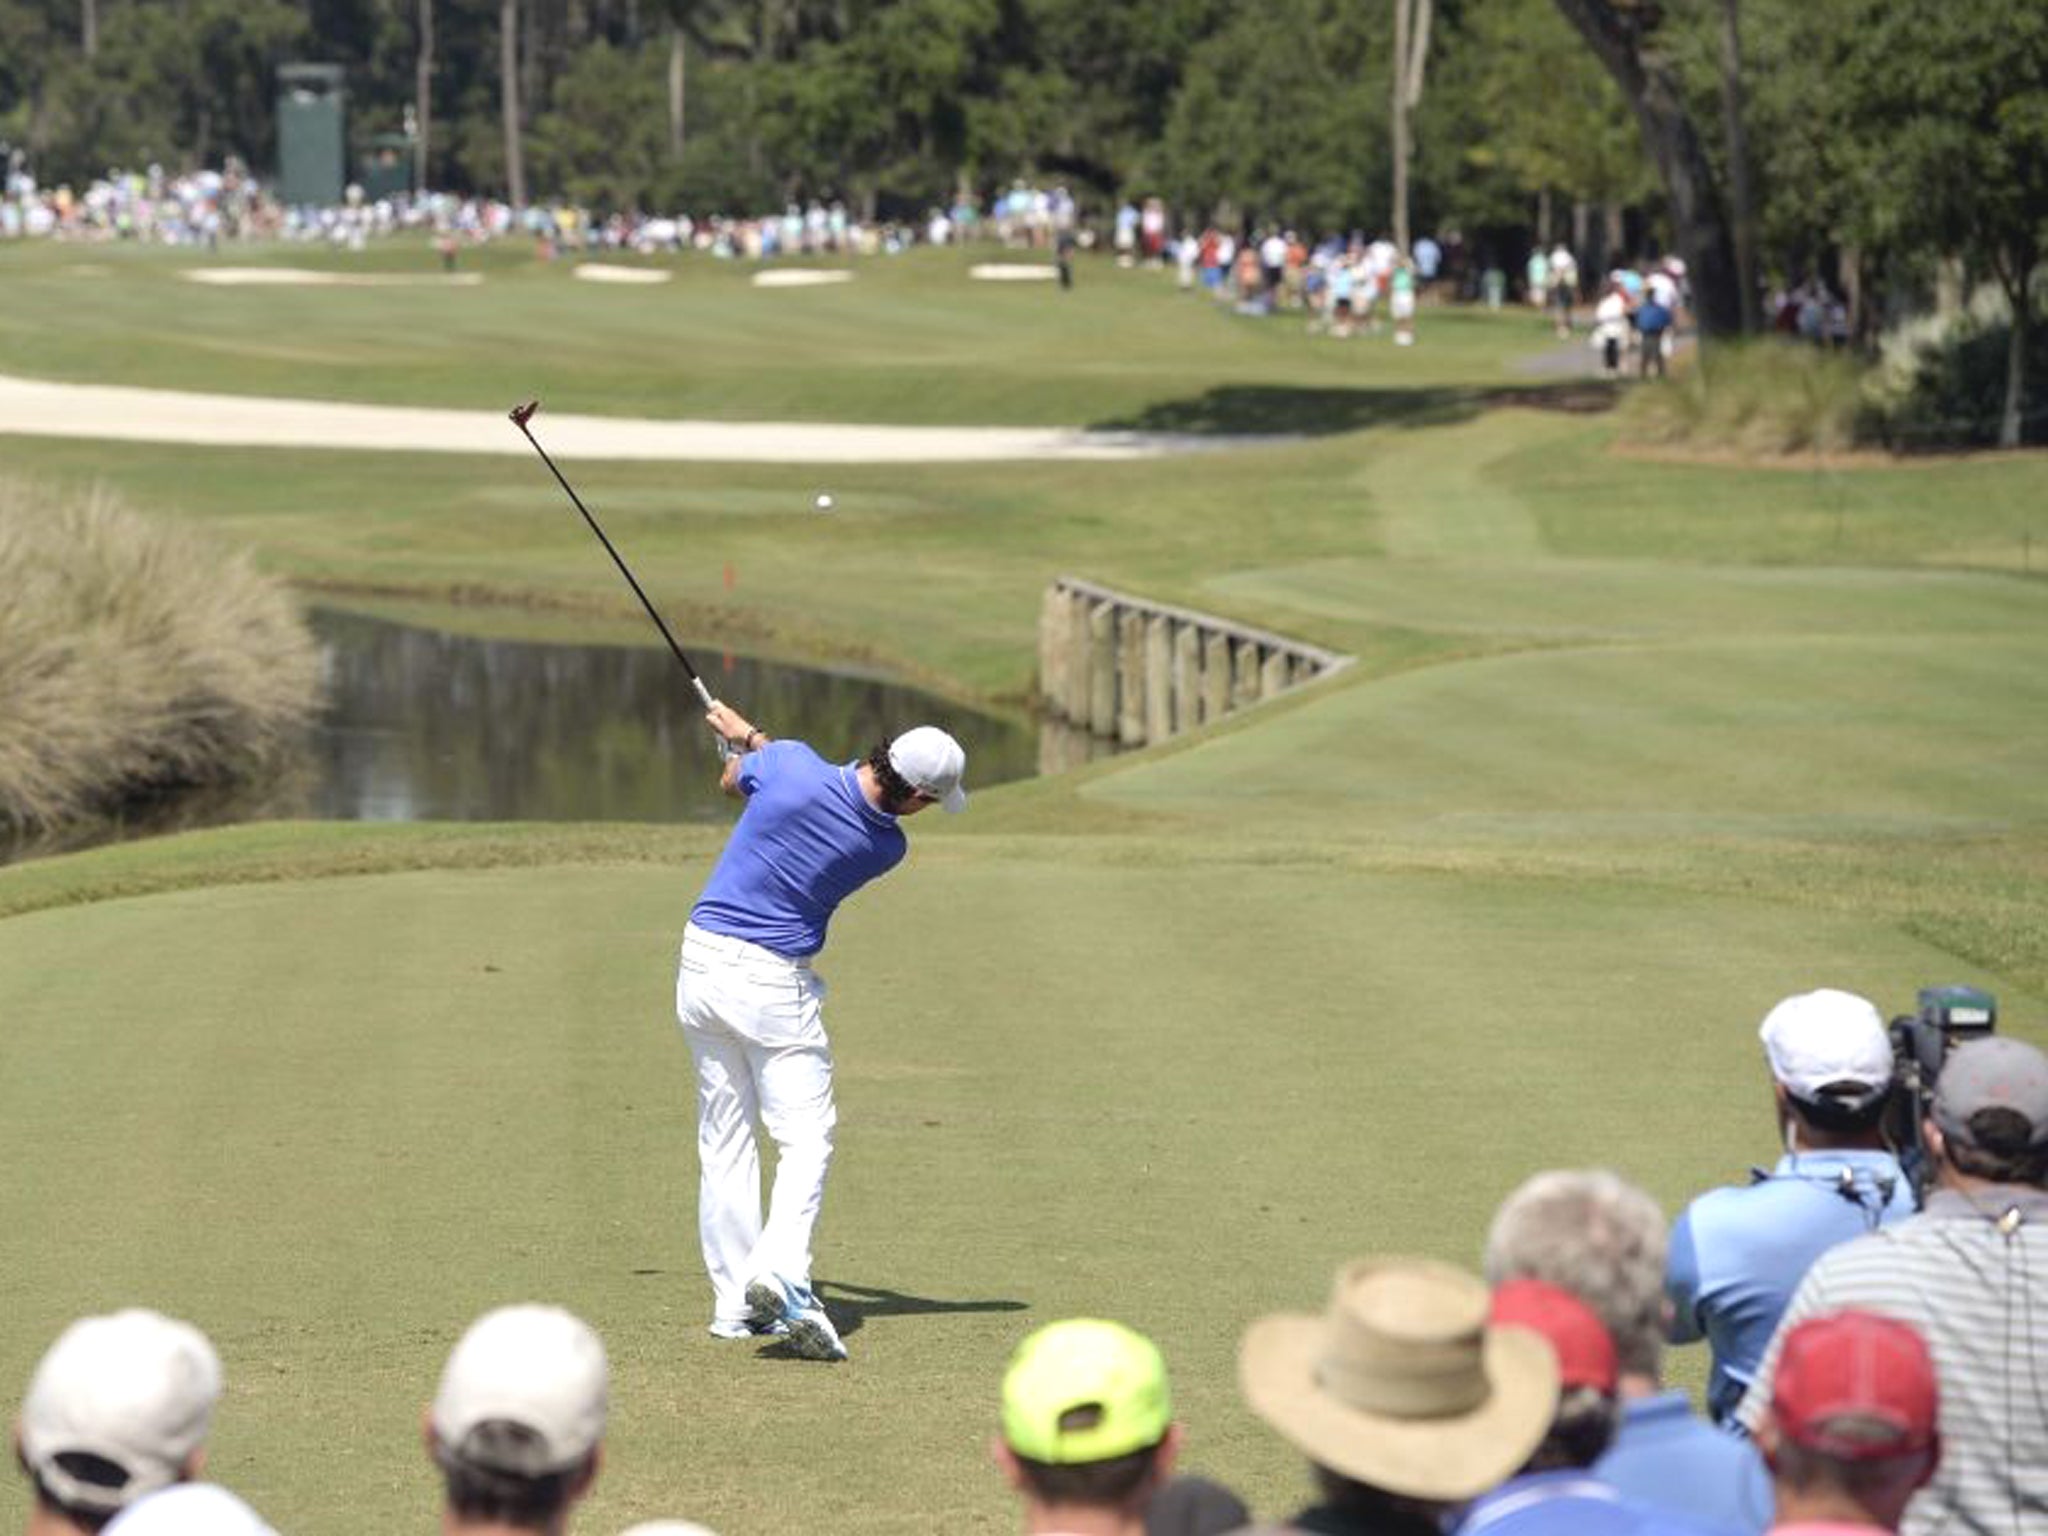 McIlroy bogeyed the seventh after driving into water